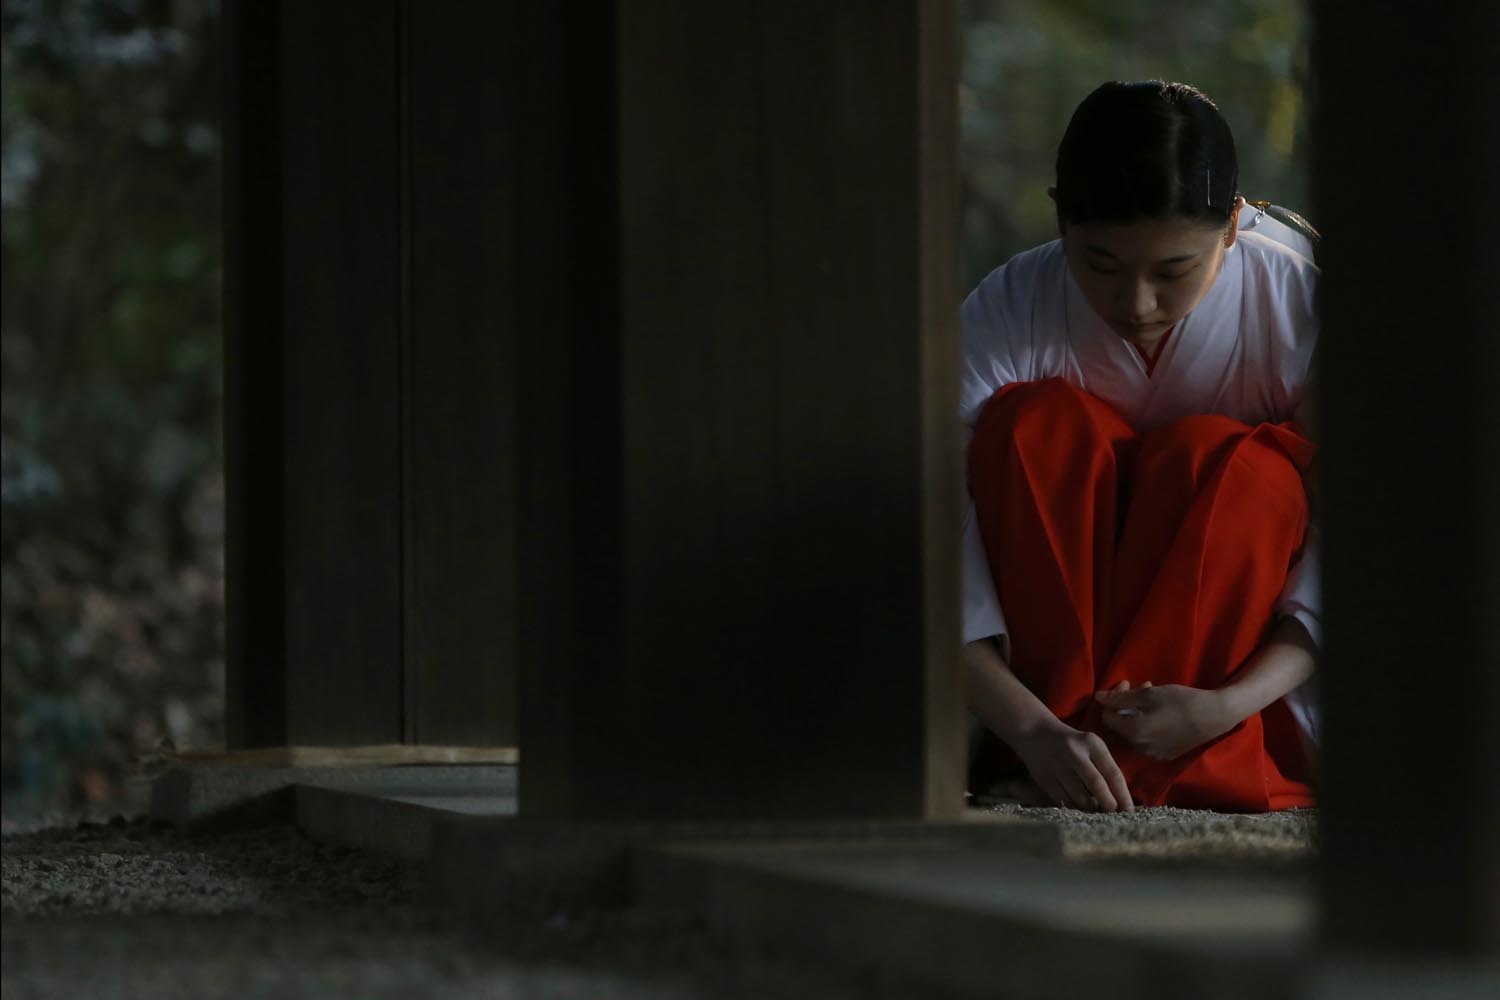 A shrine attendant cleans up after a ritual to bid farewell to 2013 and prepare for the new year at the Meiji Shrine in Tokyo